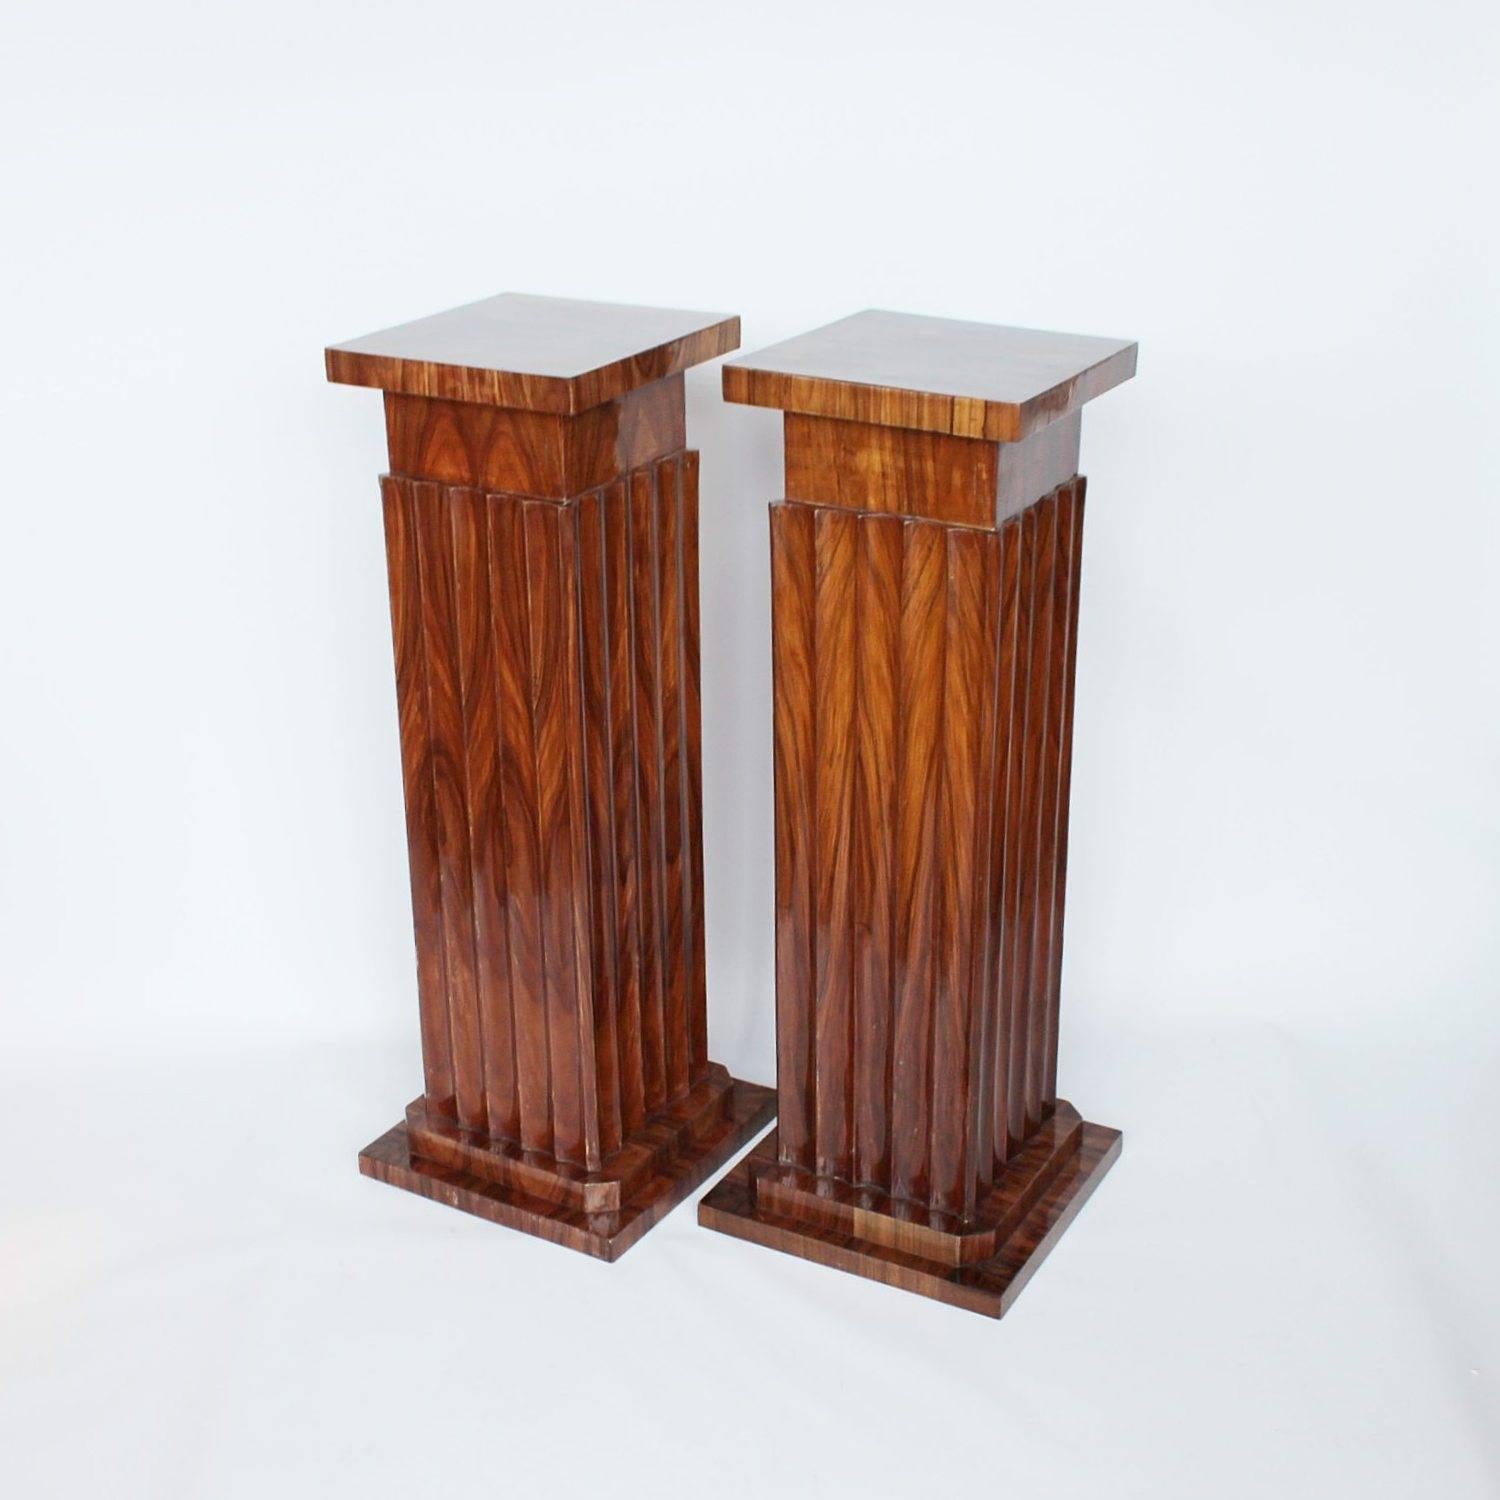 A pair of Art Deco pedestals in straight grain walnut, with fluted body.

Dimensions: H 96cm, W/D at top 30 cm, W/D at base 36 cm.

   